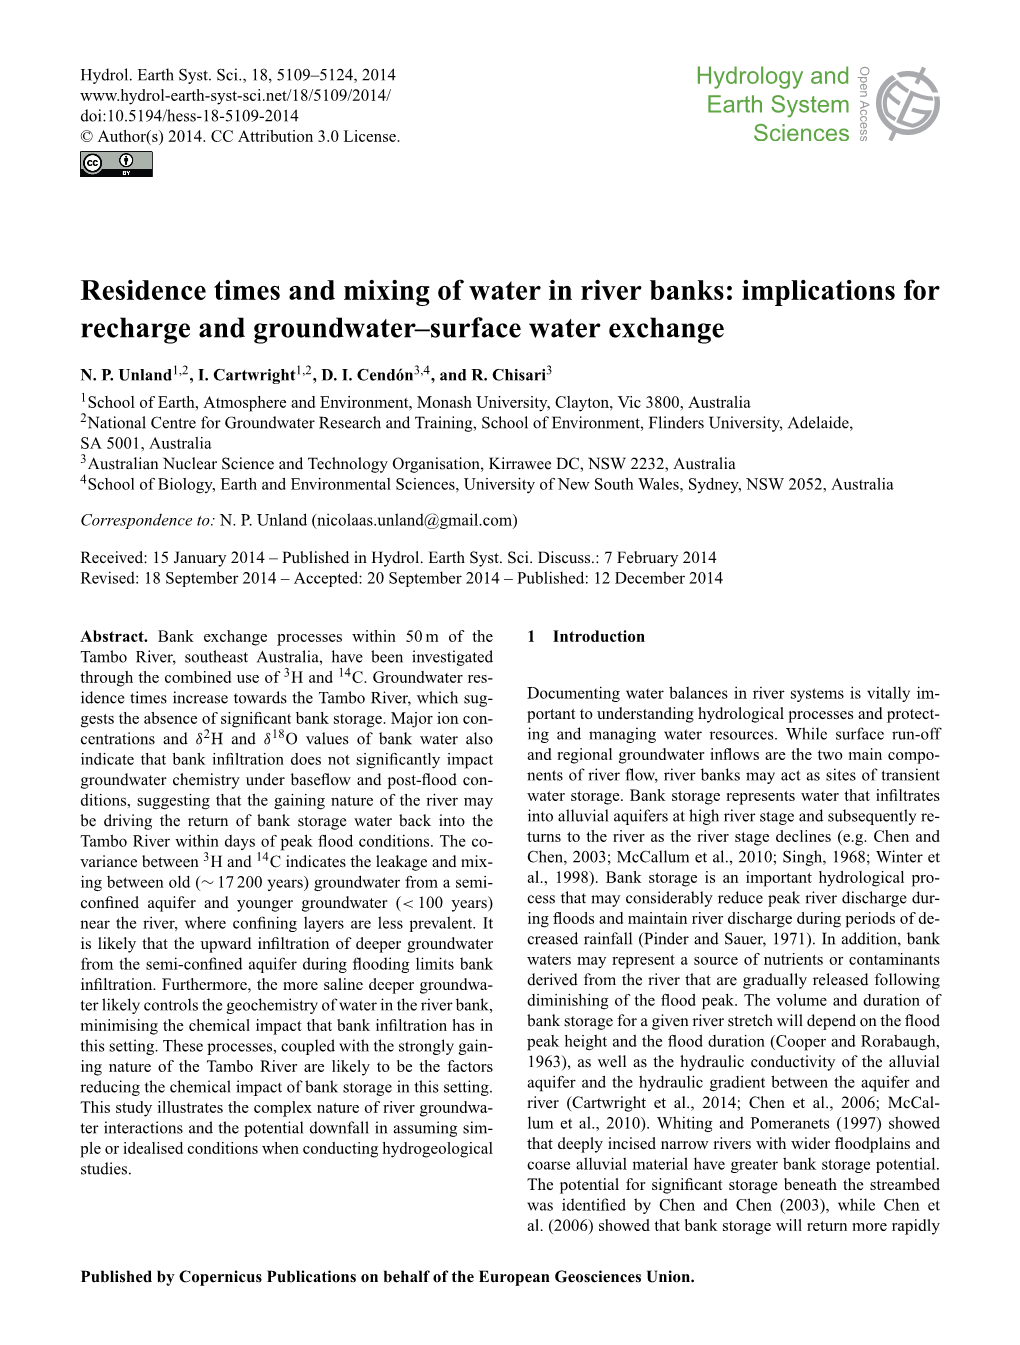 Residence Times and Mixing of Water in River Banks: Implications for Recharge and Groundwater–Surface Water Exchange